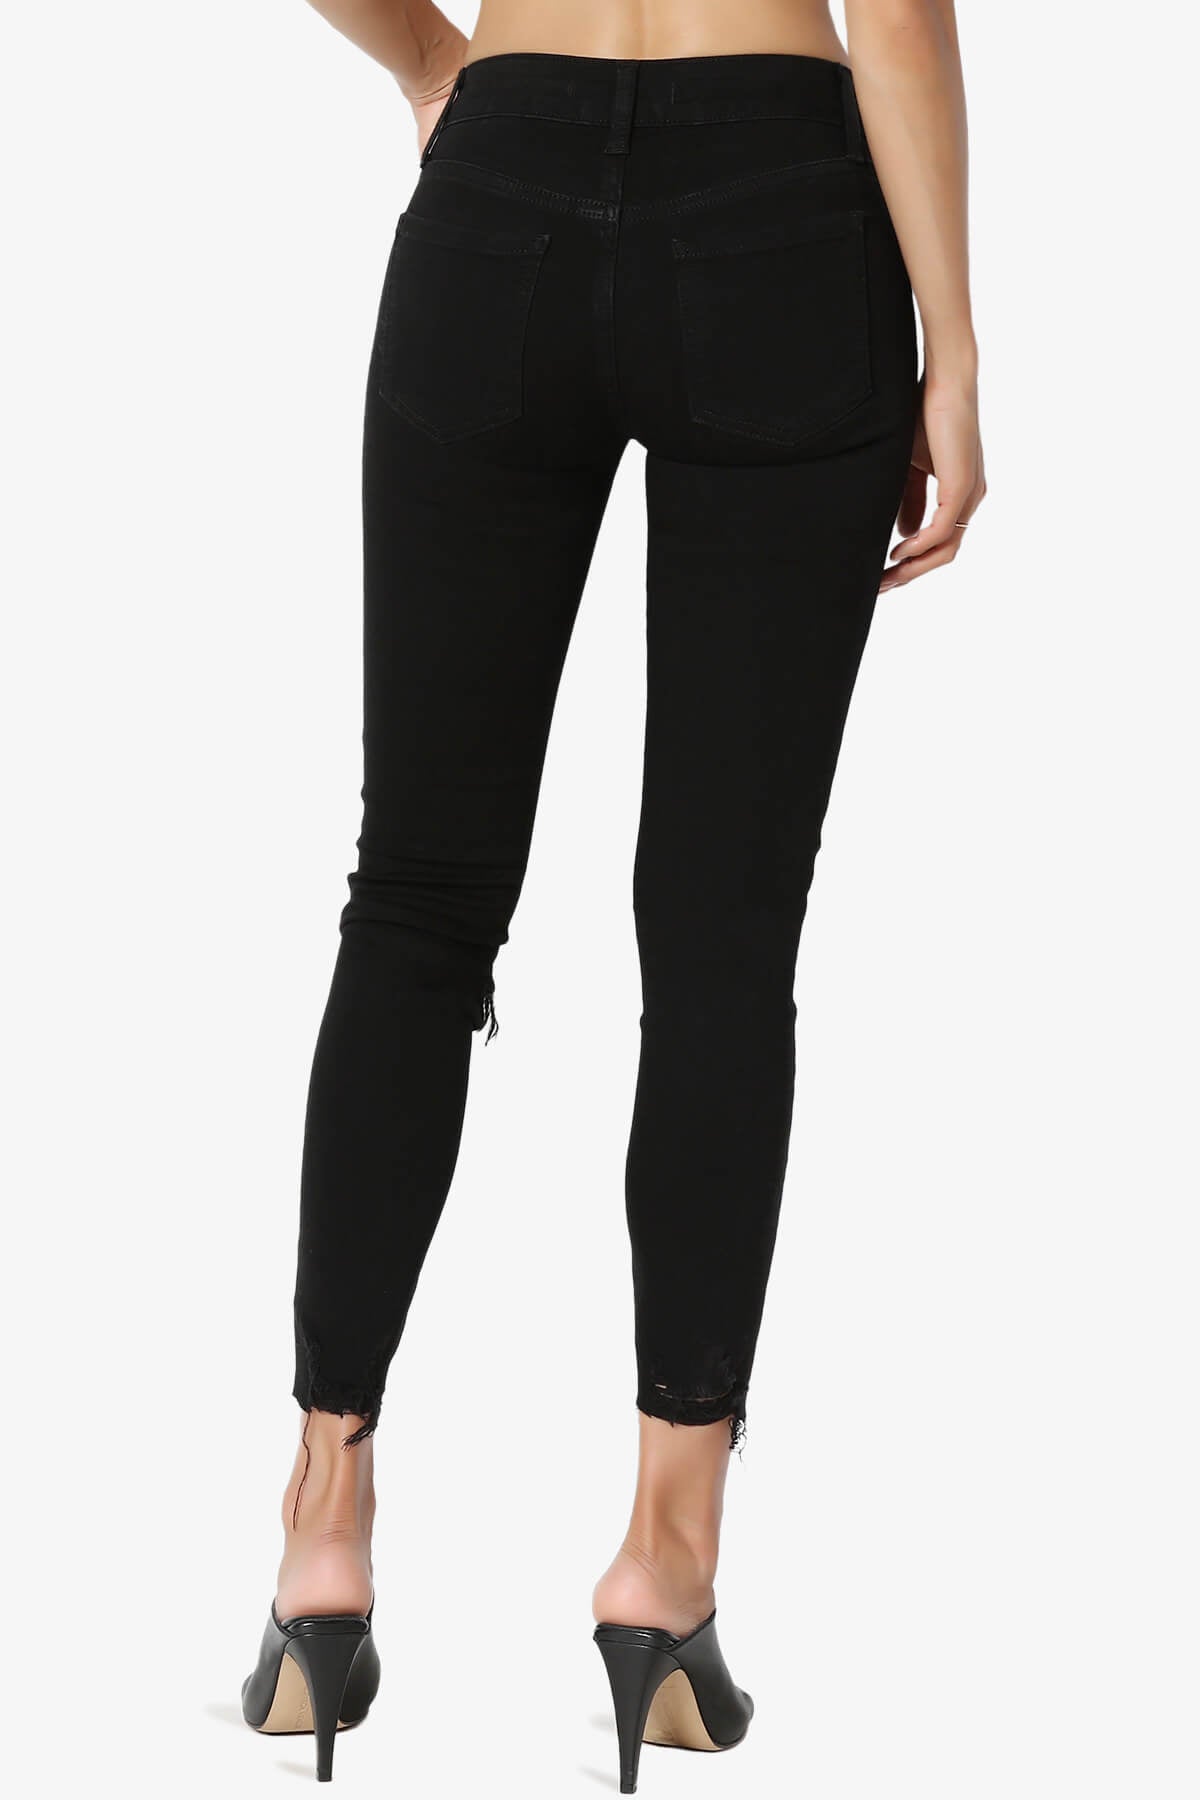 Load image into Gallery viewer, JOSIE Mid Rise Ankle Skinny Jeans in Black BLACK_2
